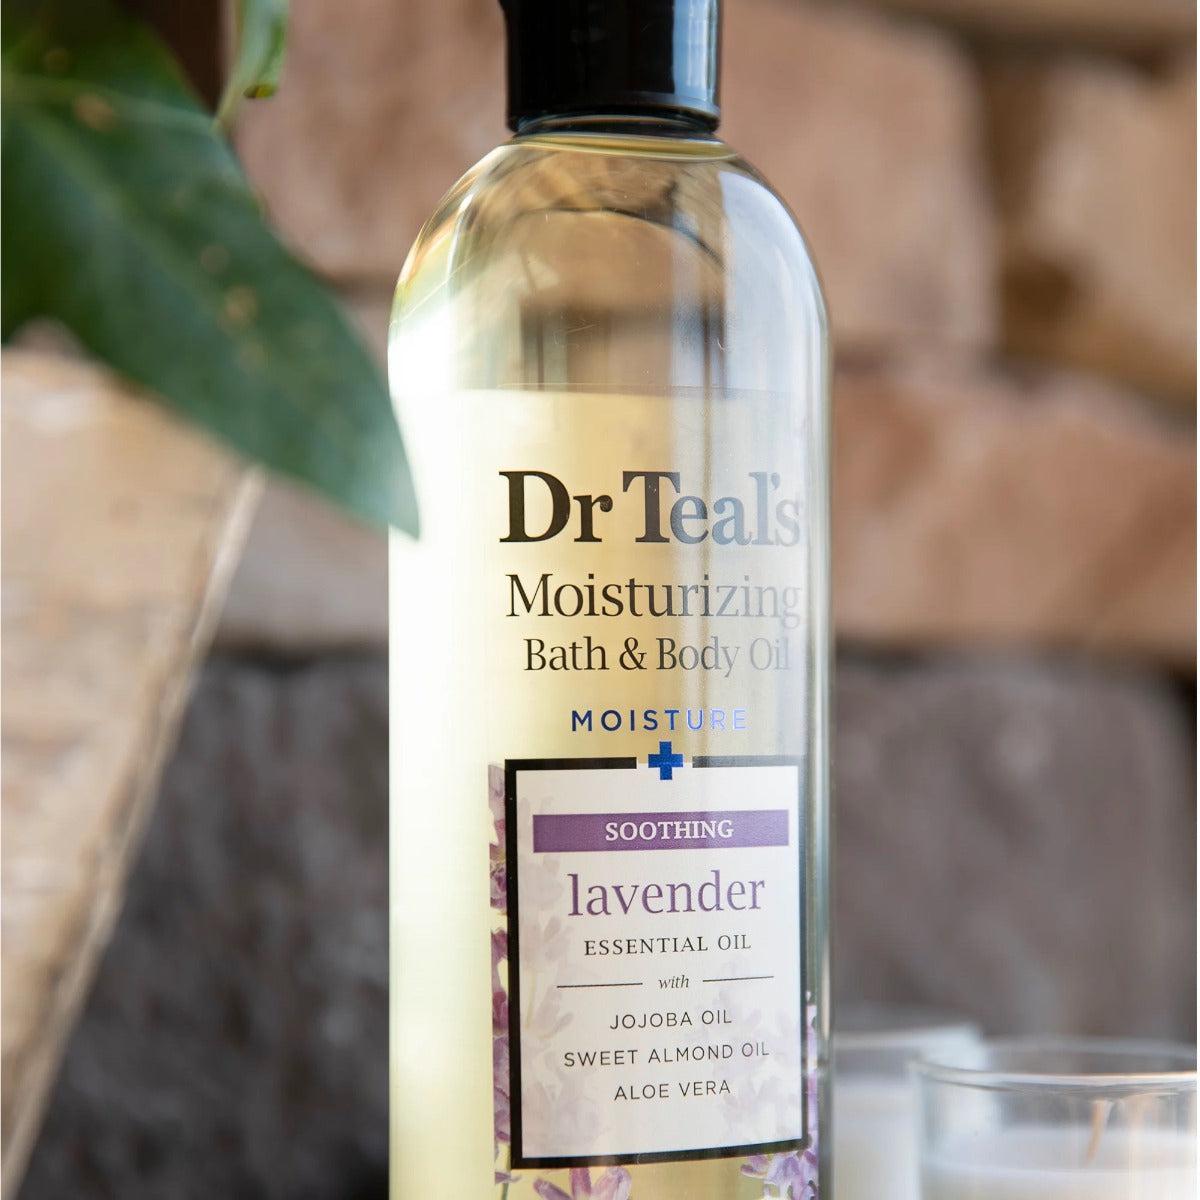 Dr Teal's Soothing Lavender Moisturizing Bath & Body Oil with Jojoba Oil, Sweet Almond Oil and Aloe Vera 260ml